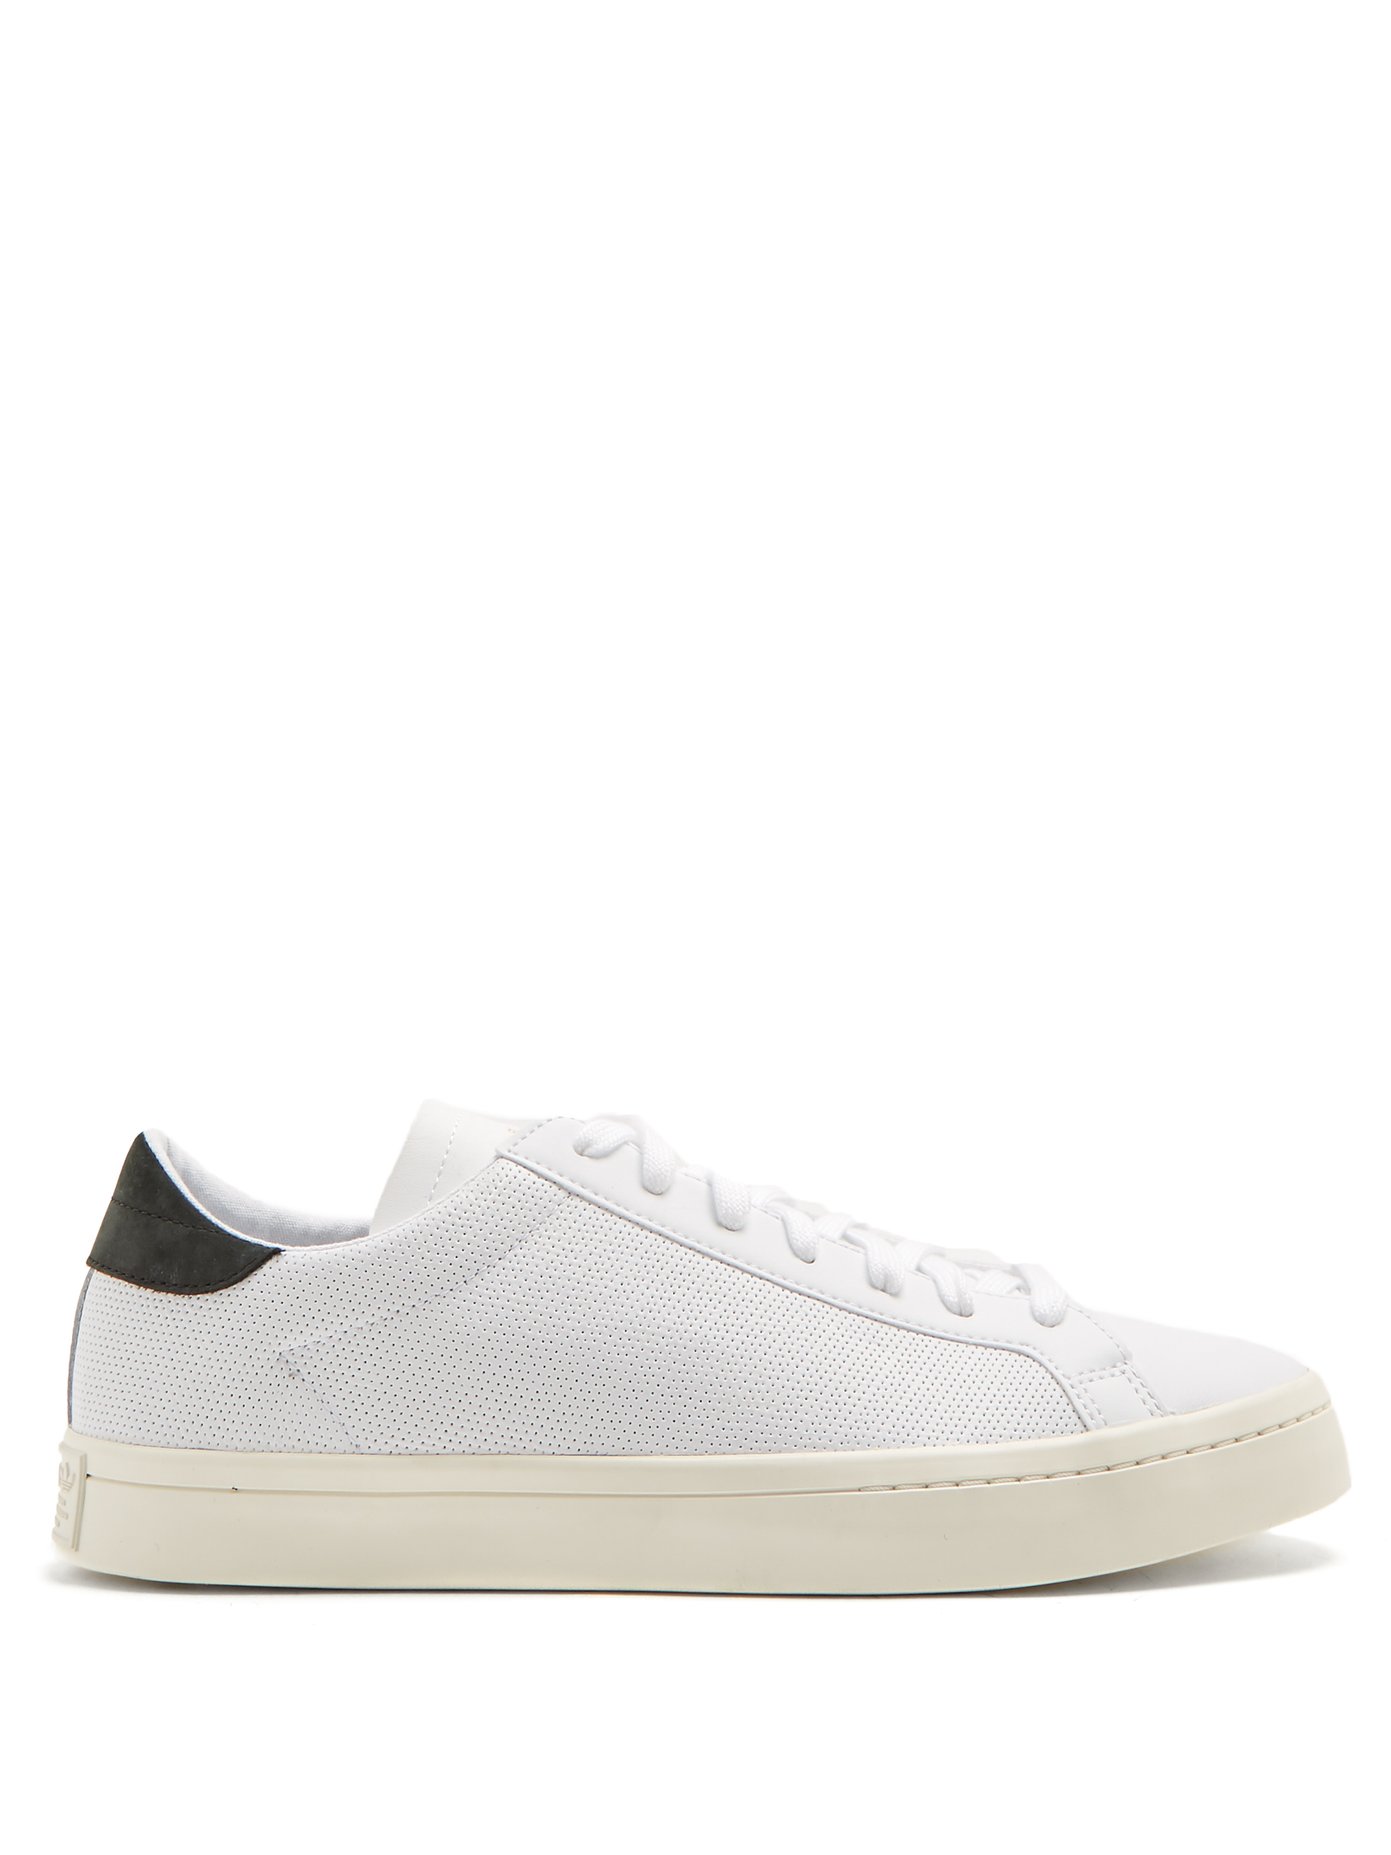 Court Vantage low-top trainers | Adidas 